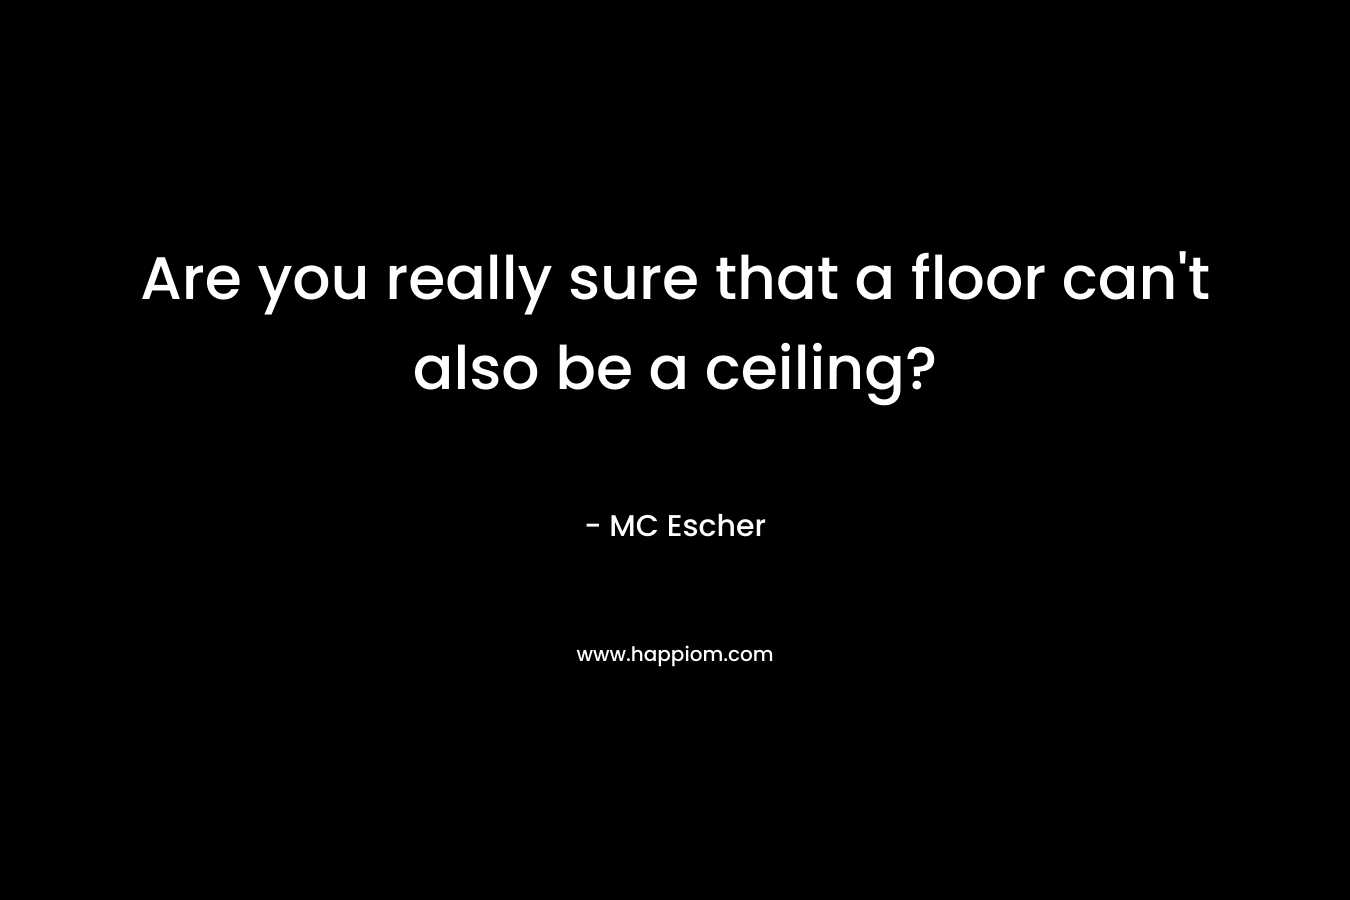 Are you really sure that a floor can't also be a ceiling?